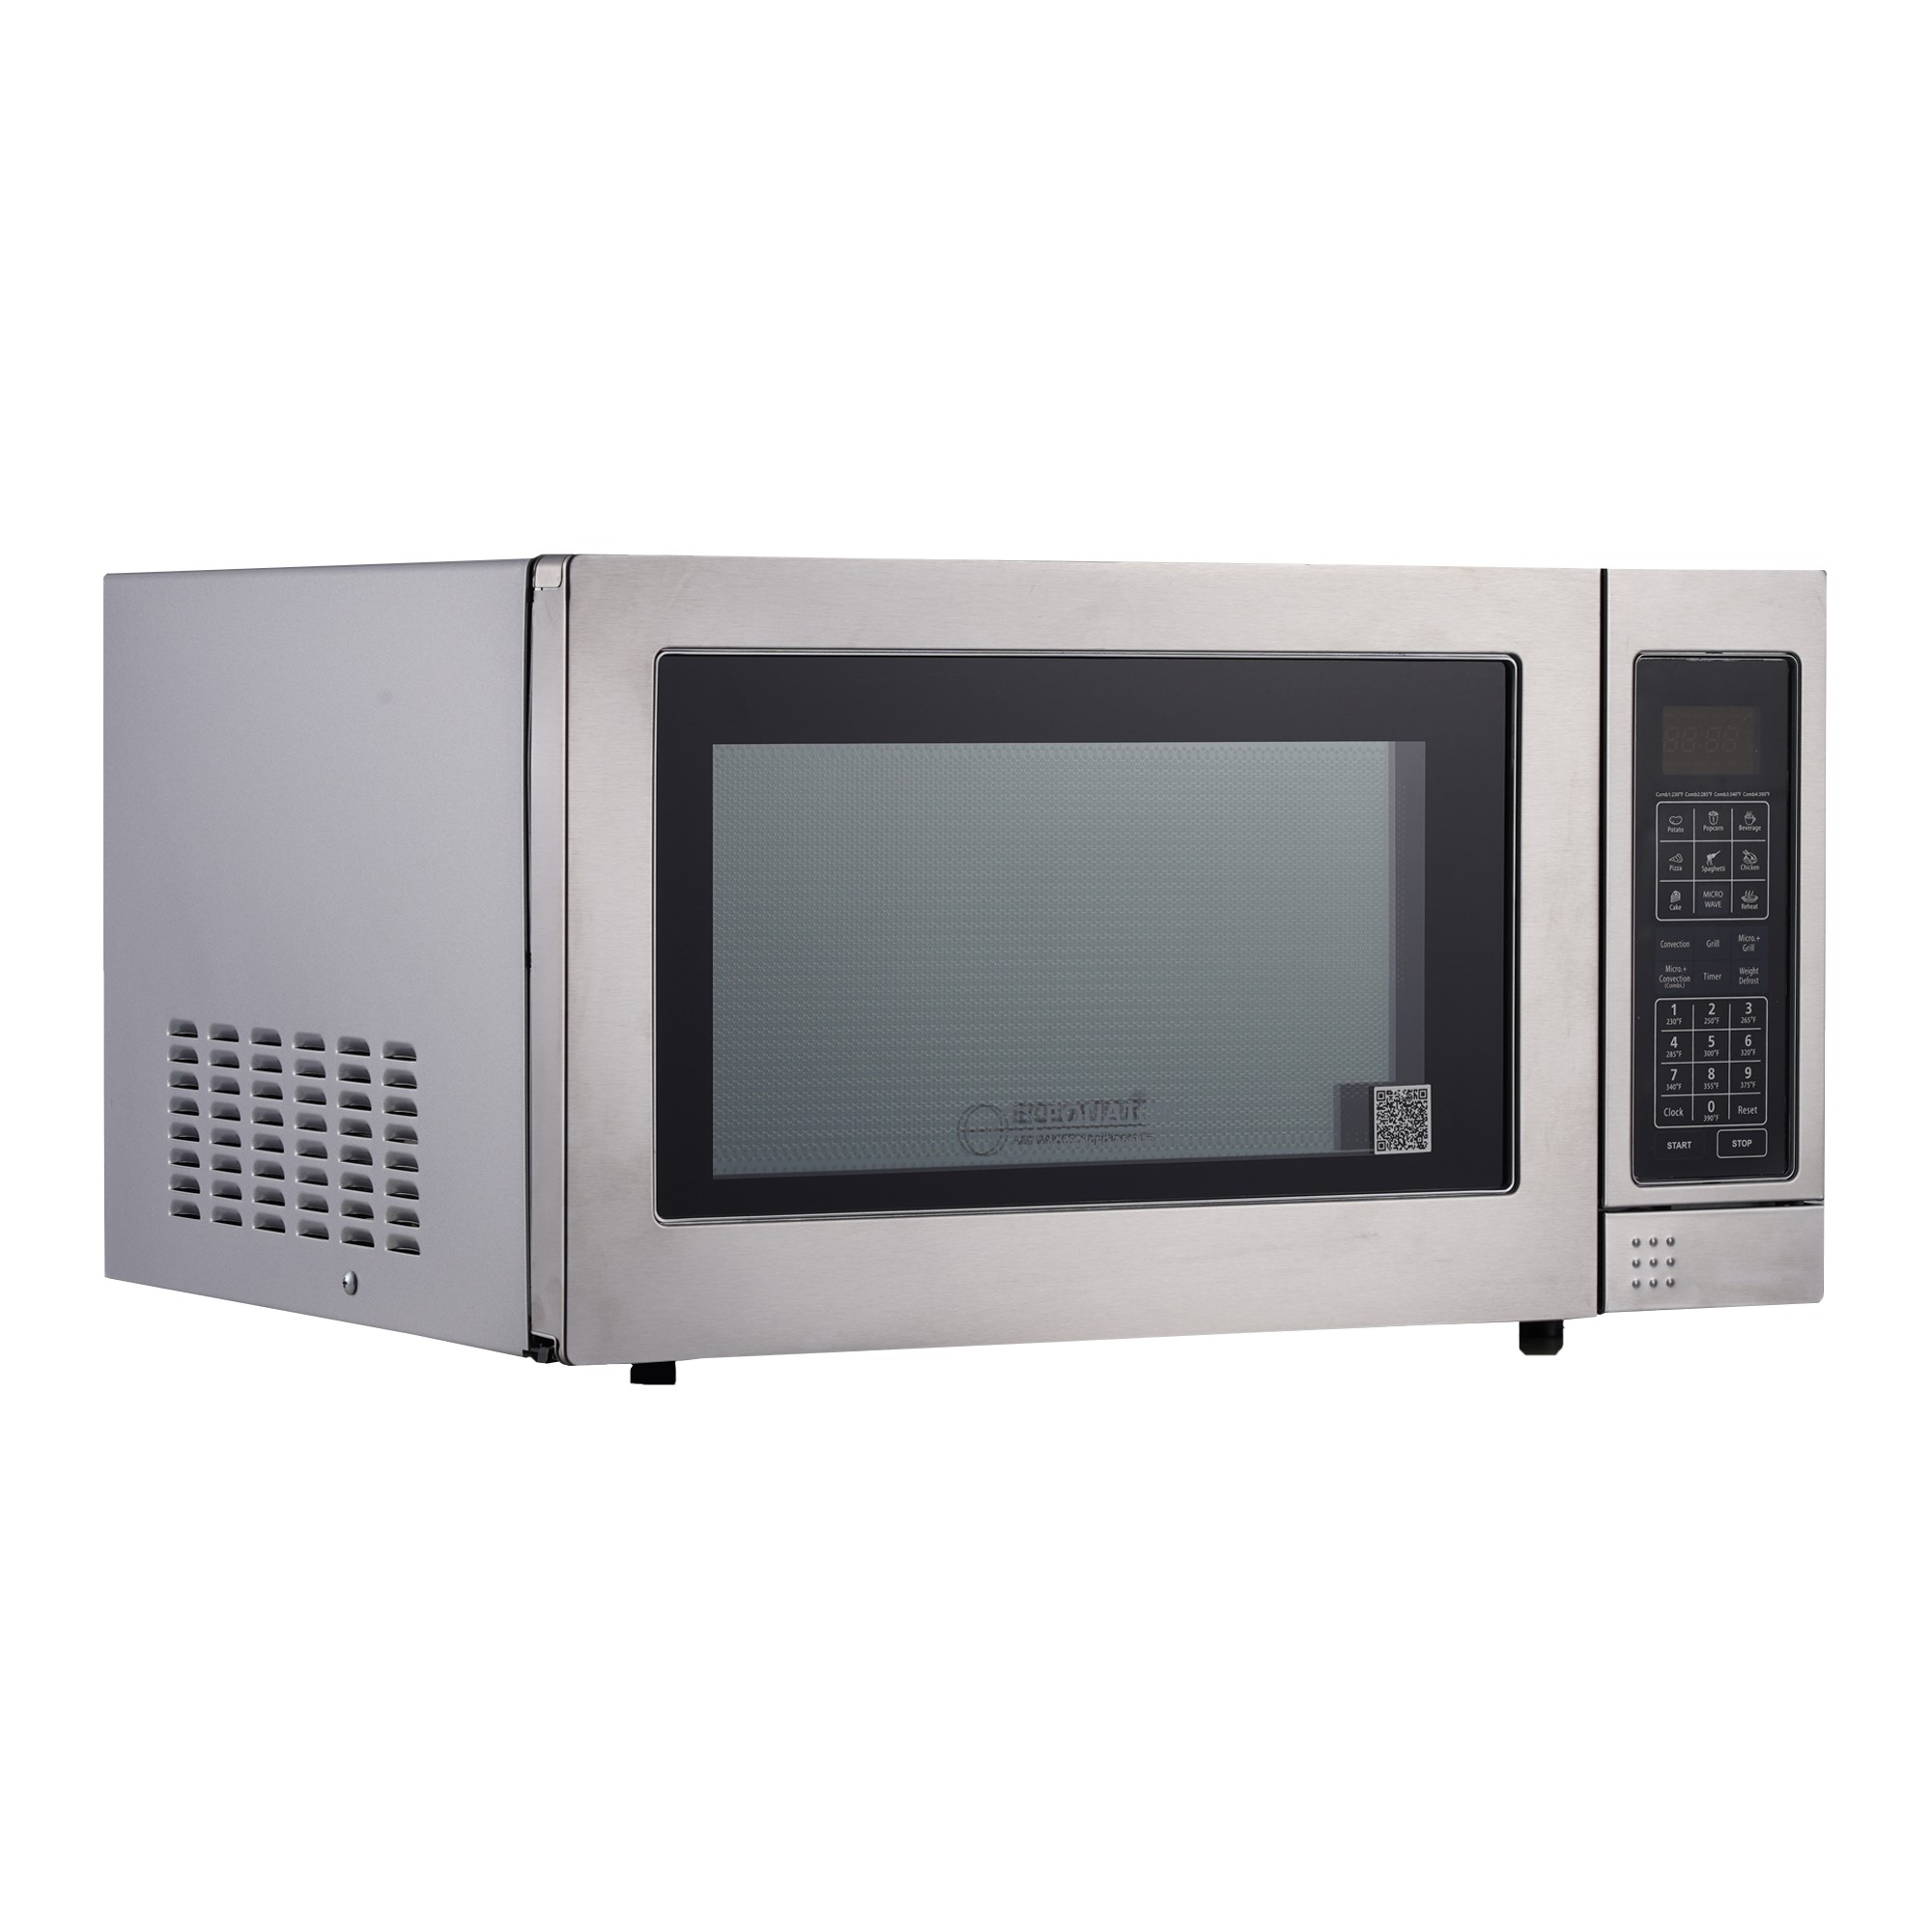 Equator 1.2 cu.ft. 3-in-1 Combi Microwave + Grill + Convection Oven in Stainless